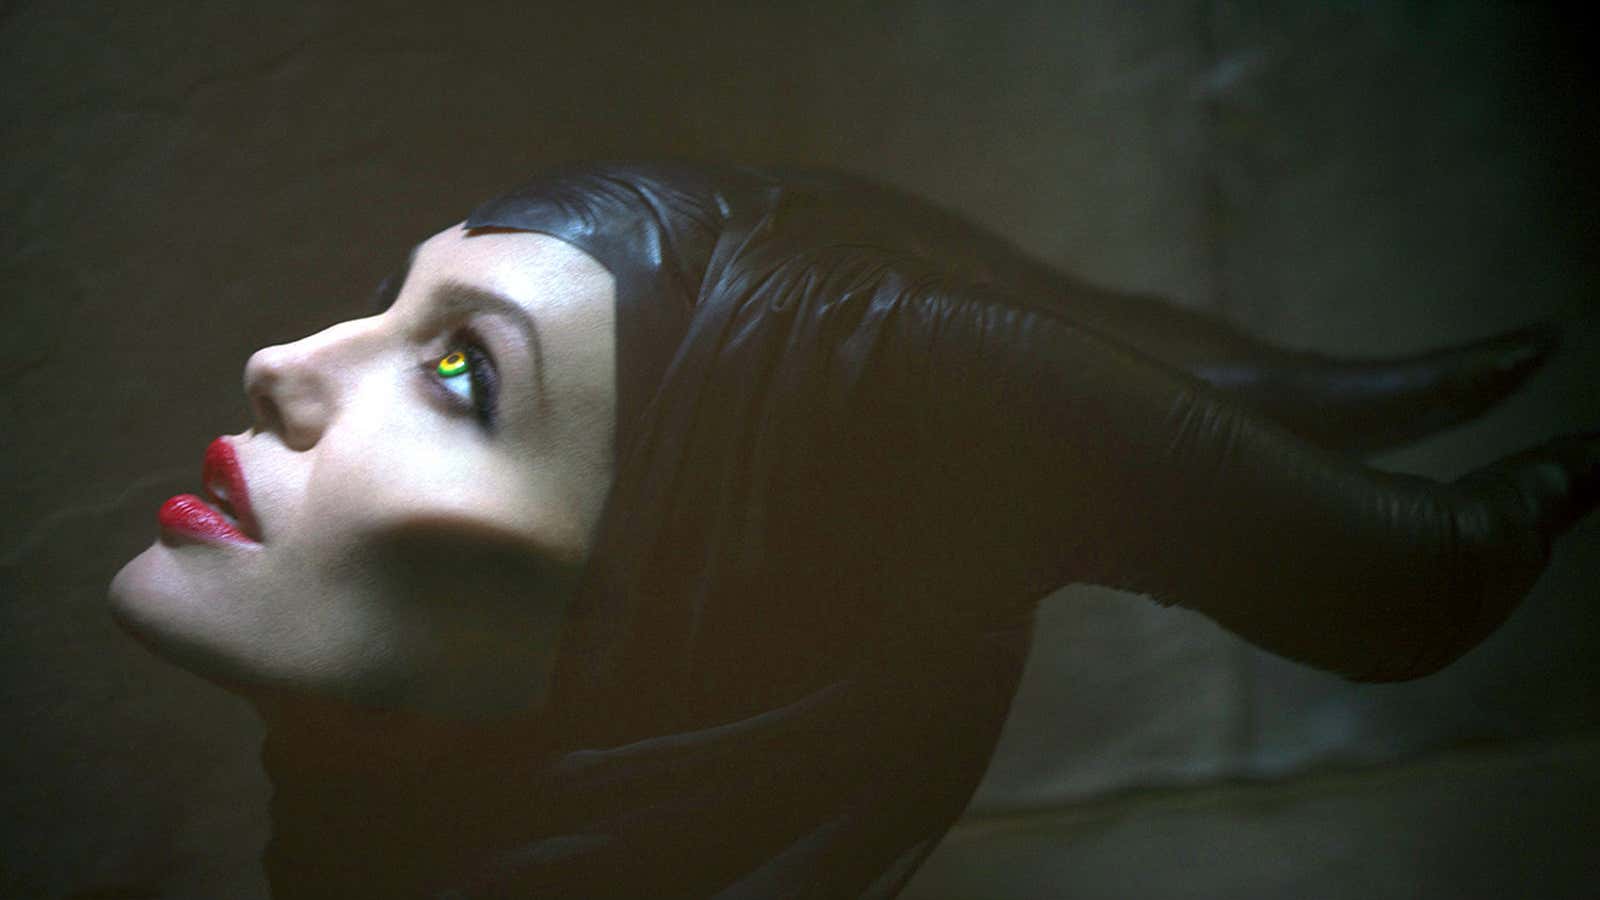 In “Maleficent,” Angelina Jolie reveals what drove her to curse her baby, better known as Sleeping Beauty.